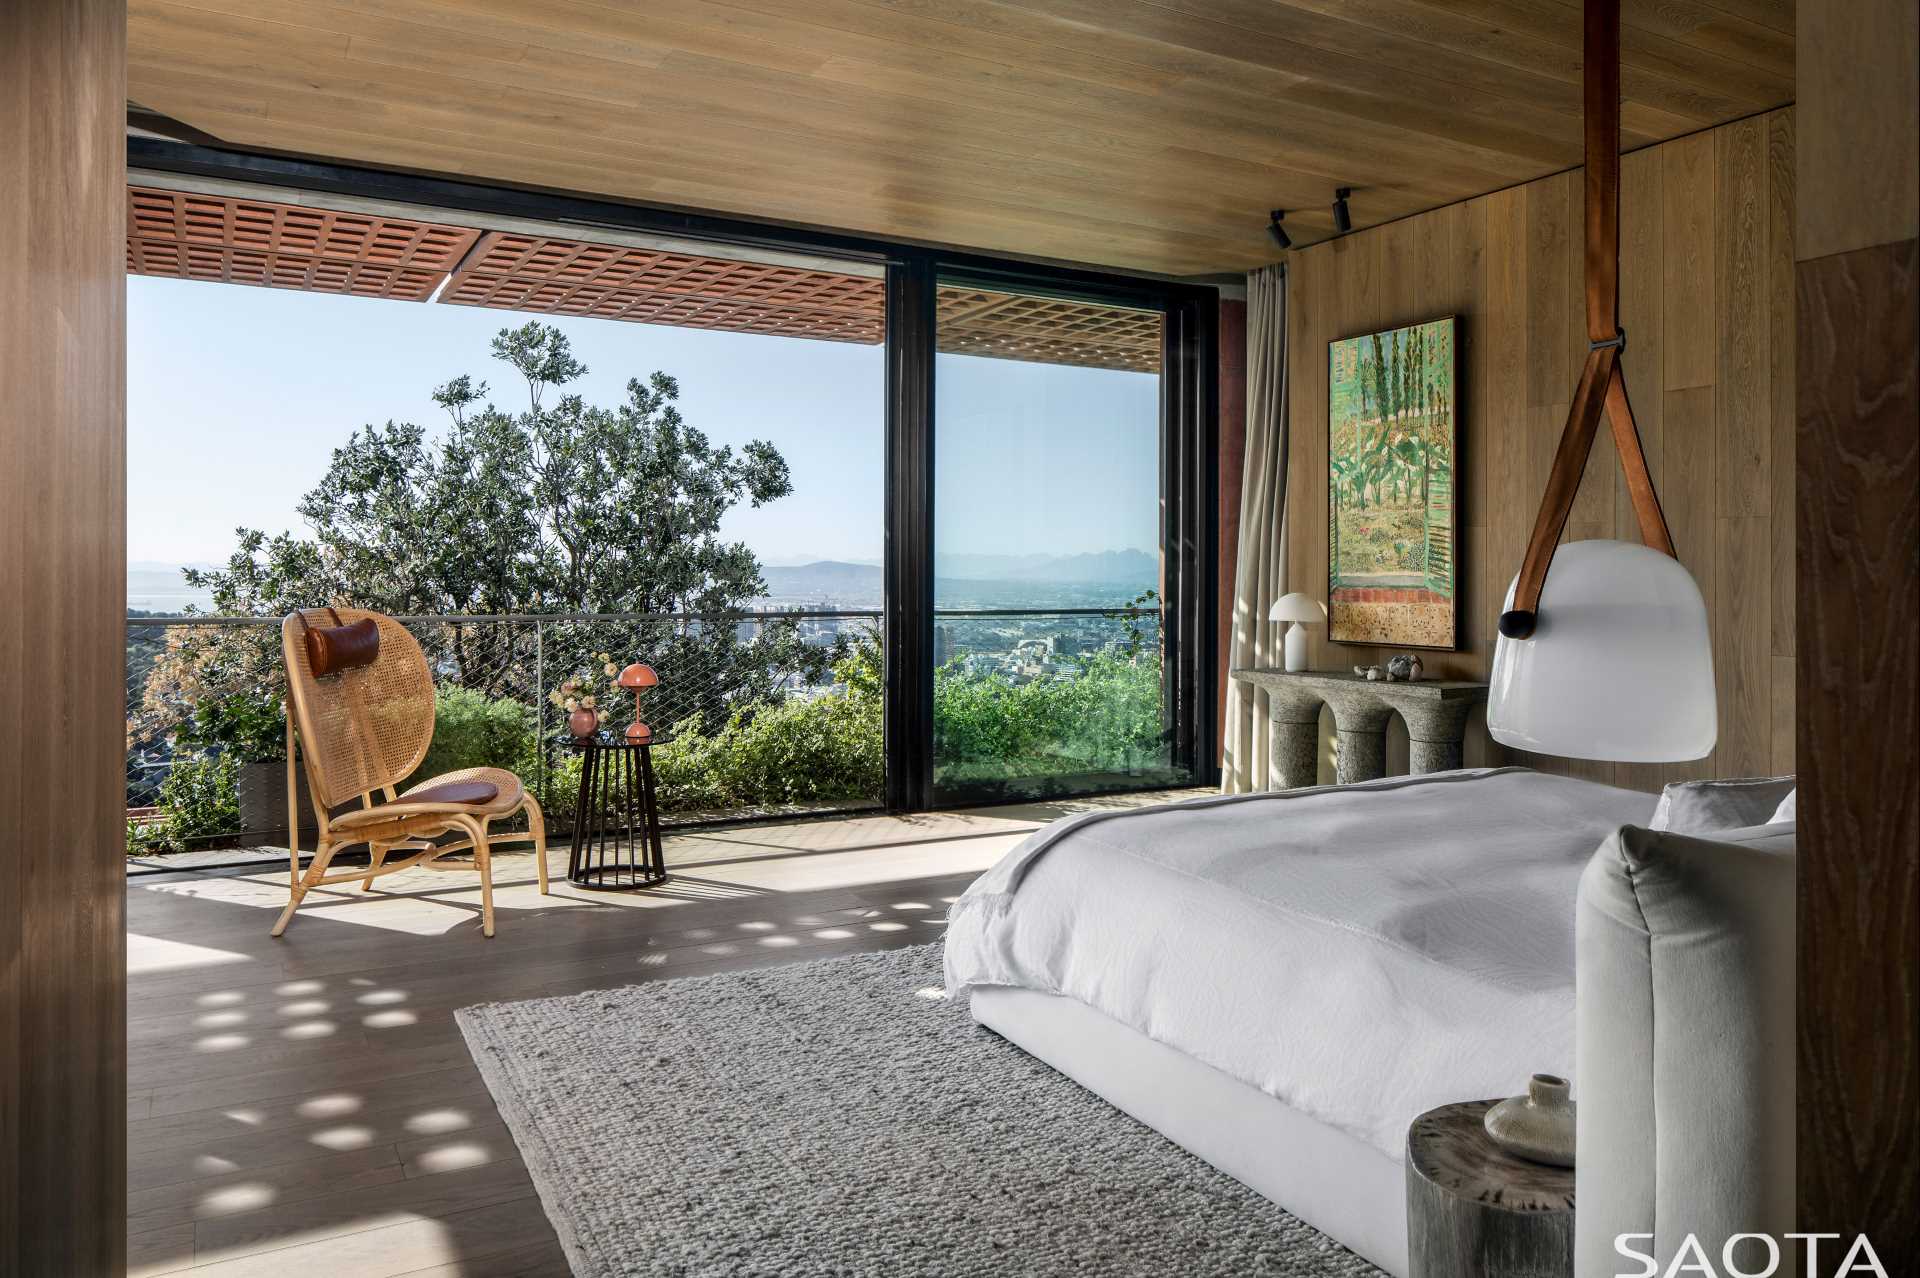 In this modern bedroom, sliding glass doors open the bedroom to the outdoors, while wood adds a sense of warmth to the room.